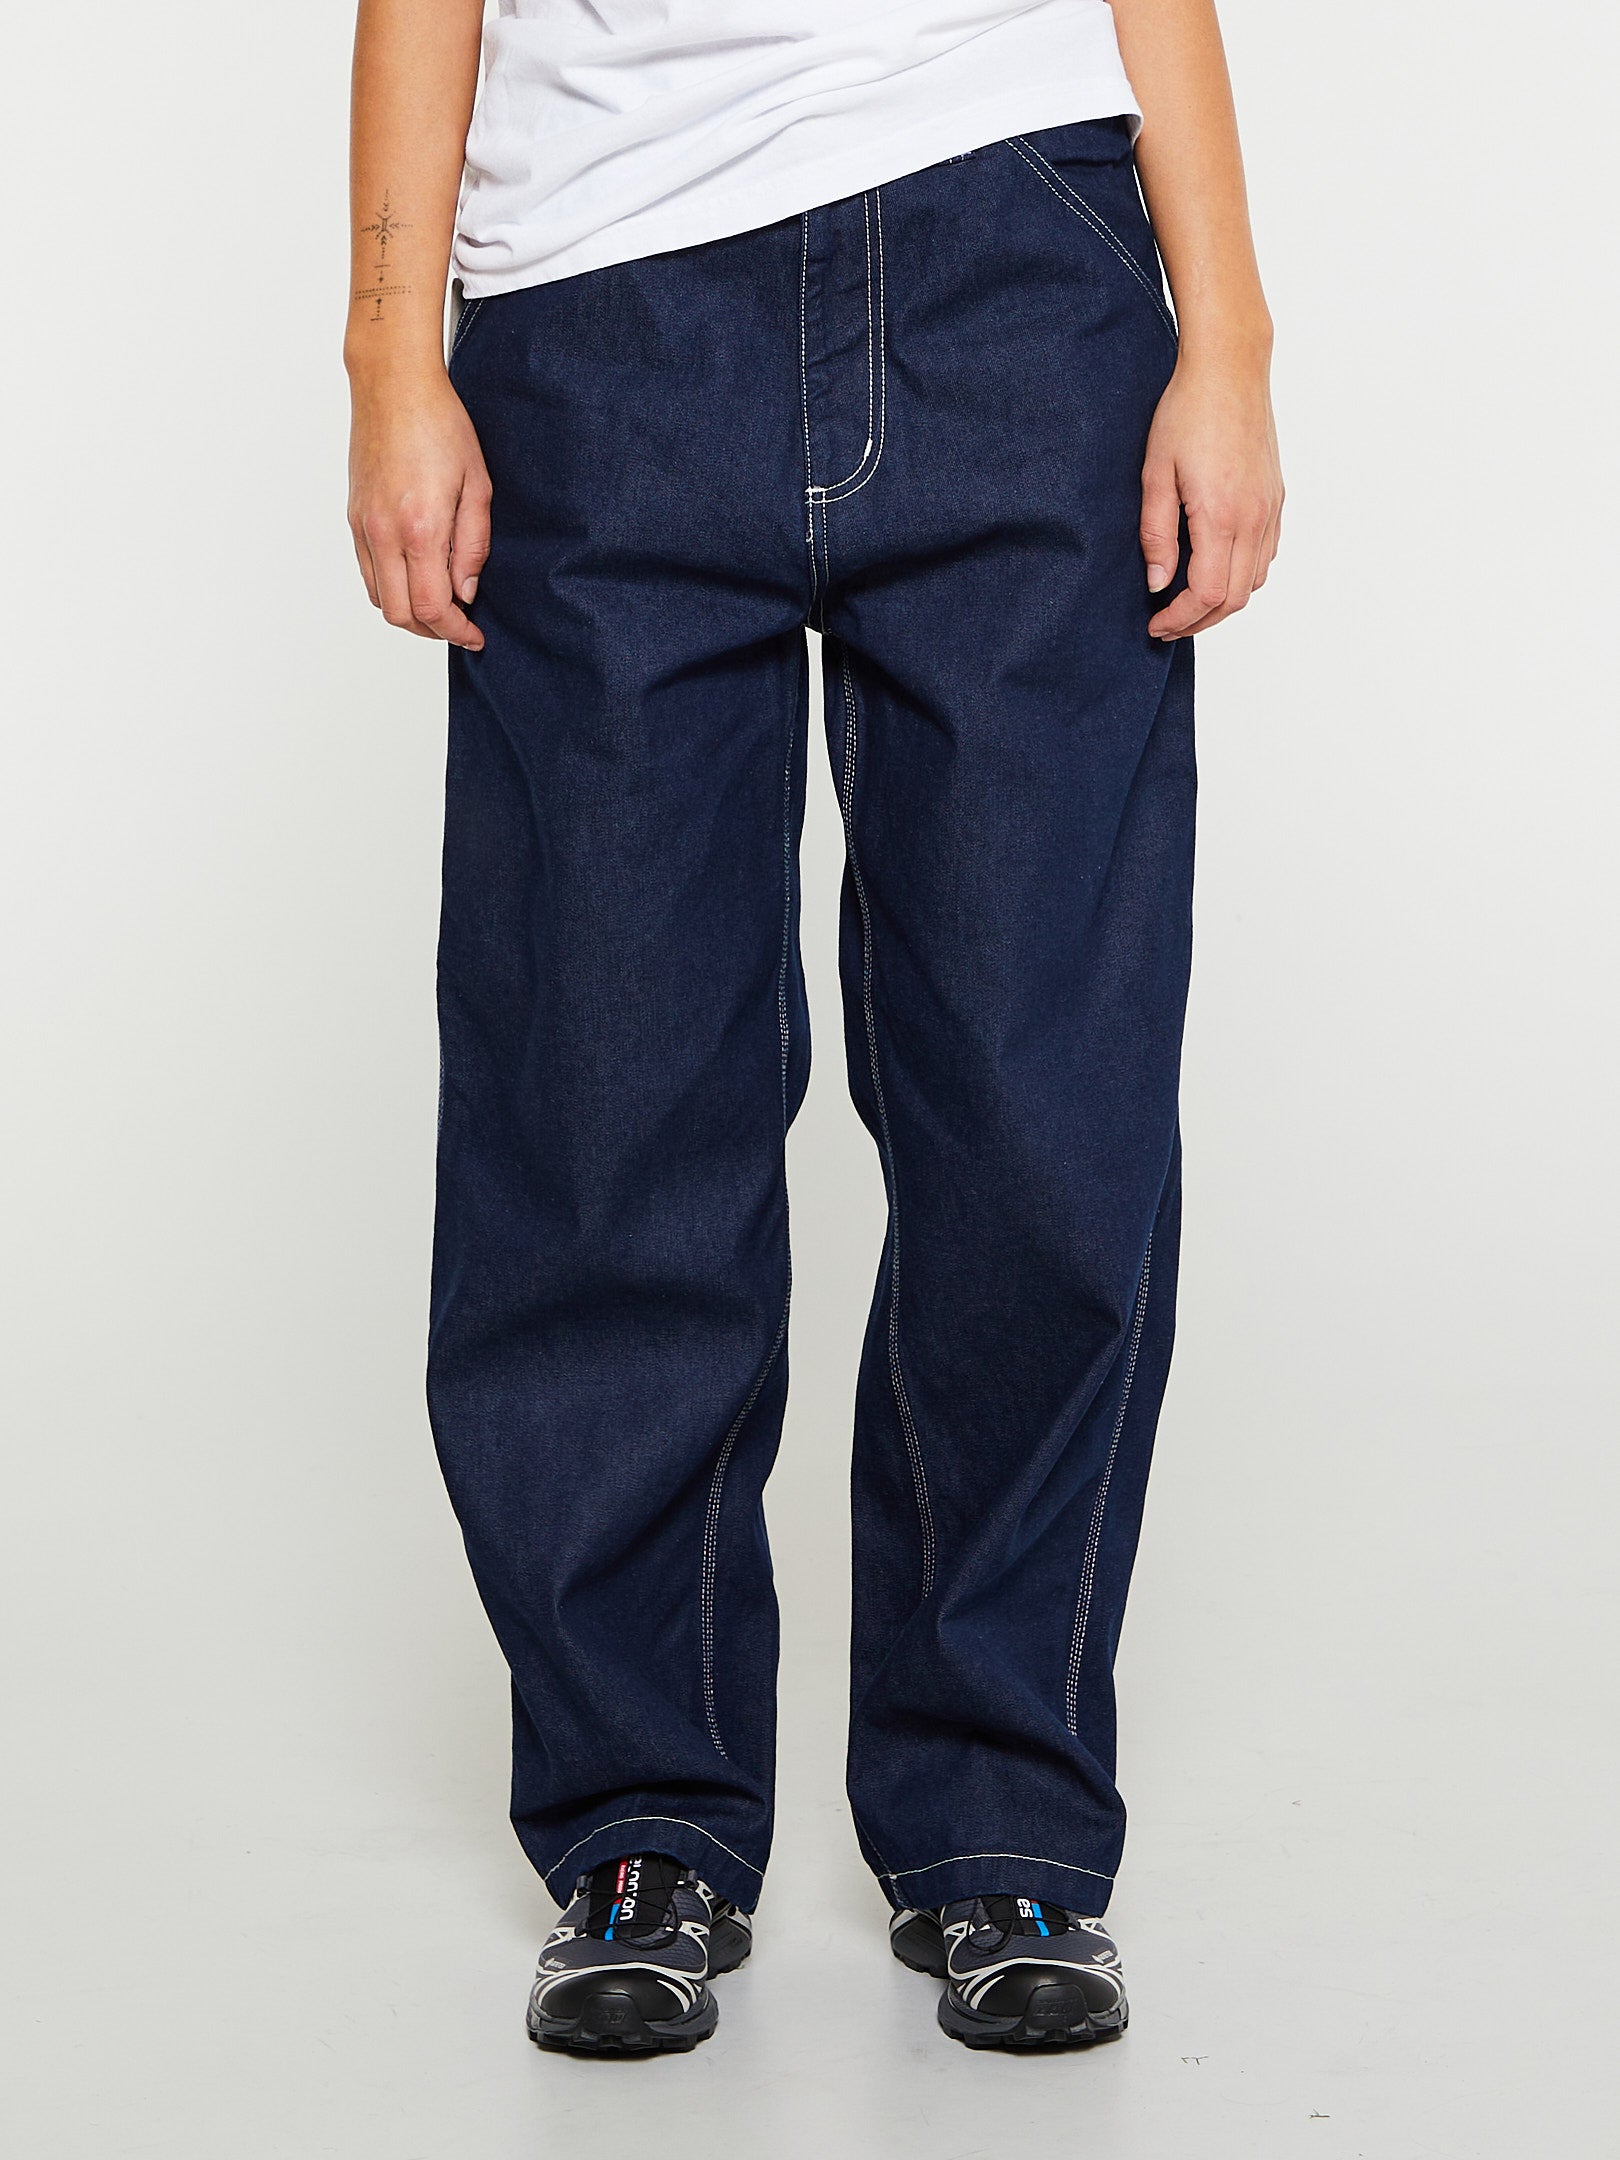 Carhartt WIP - OG Single Knee Pant in Blue one wash – stoy